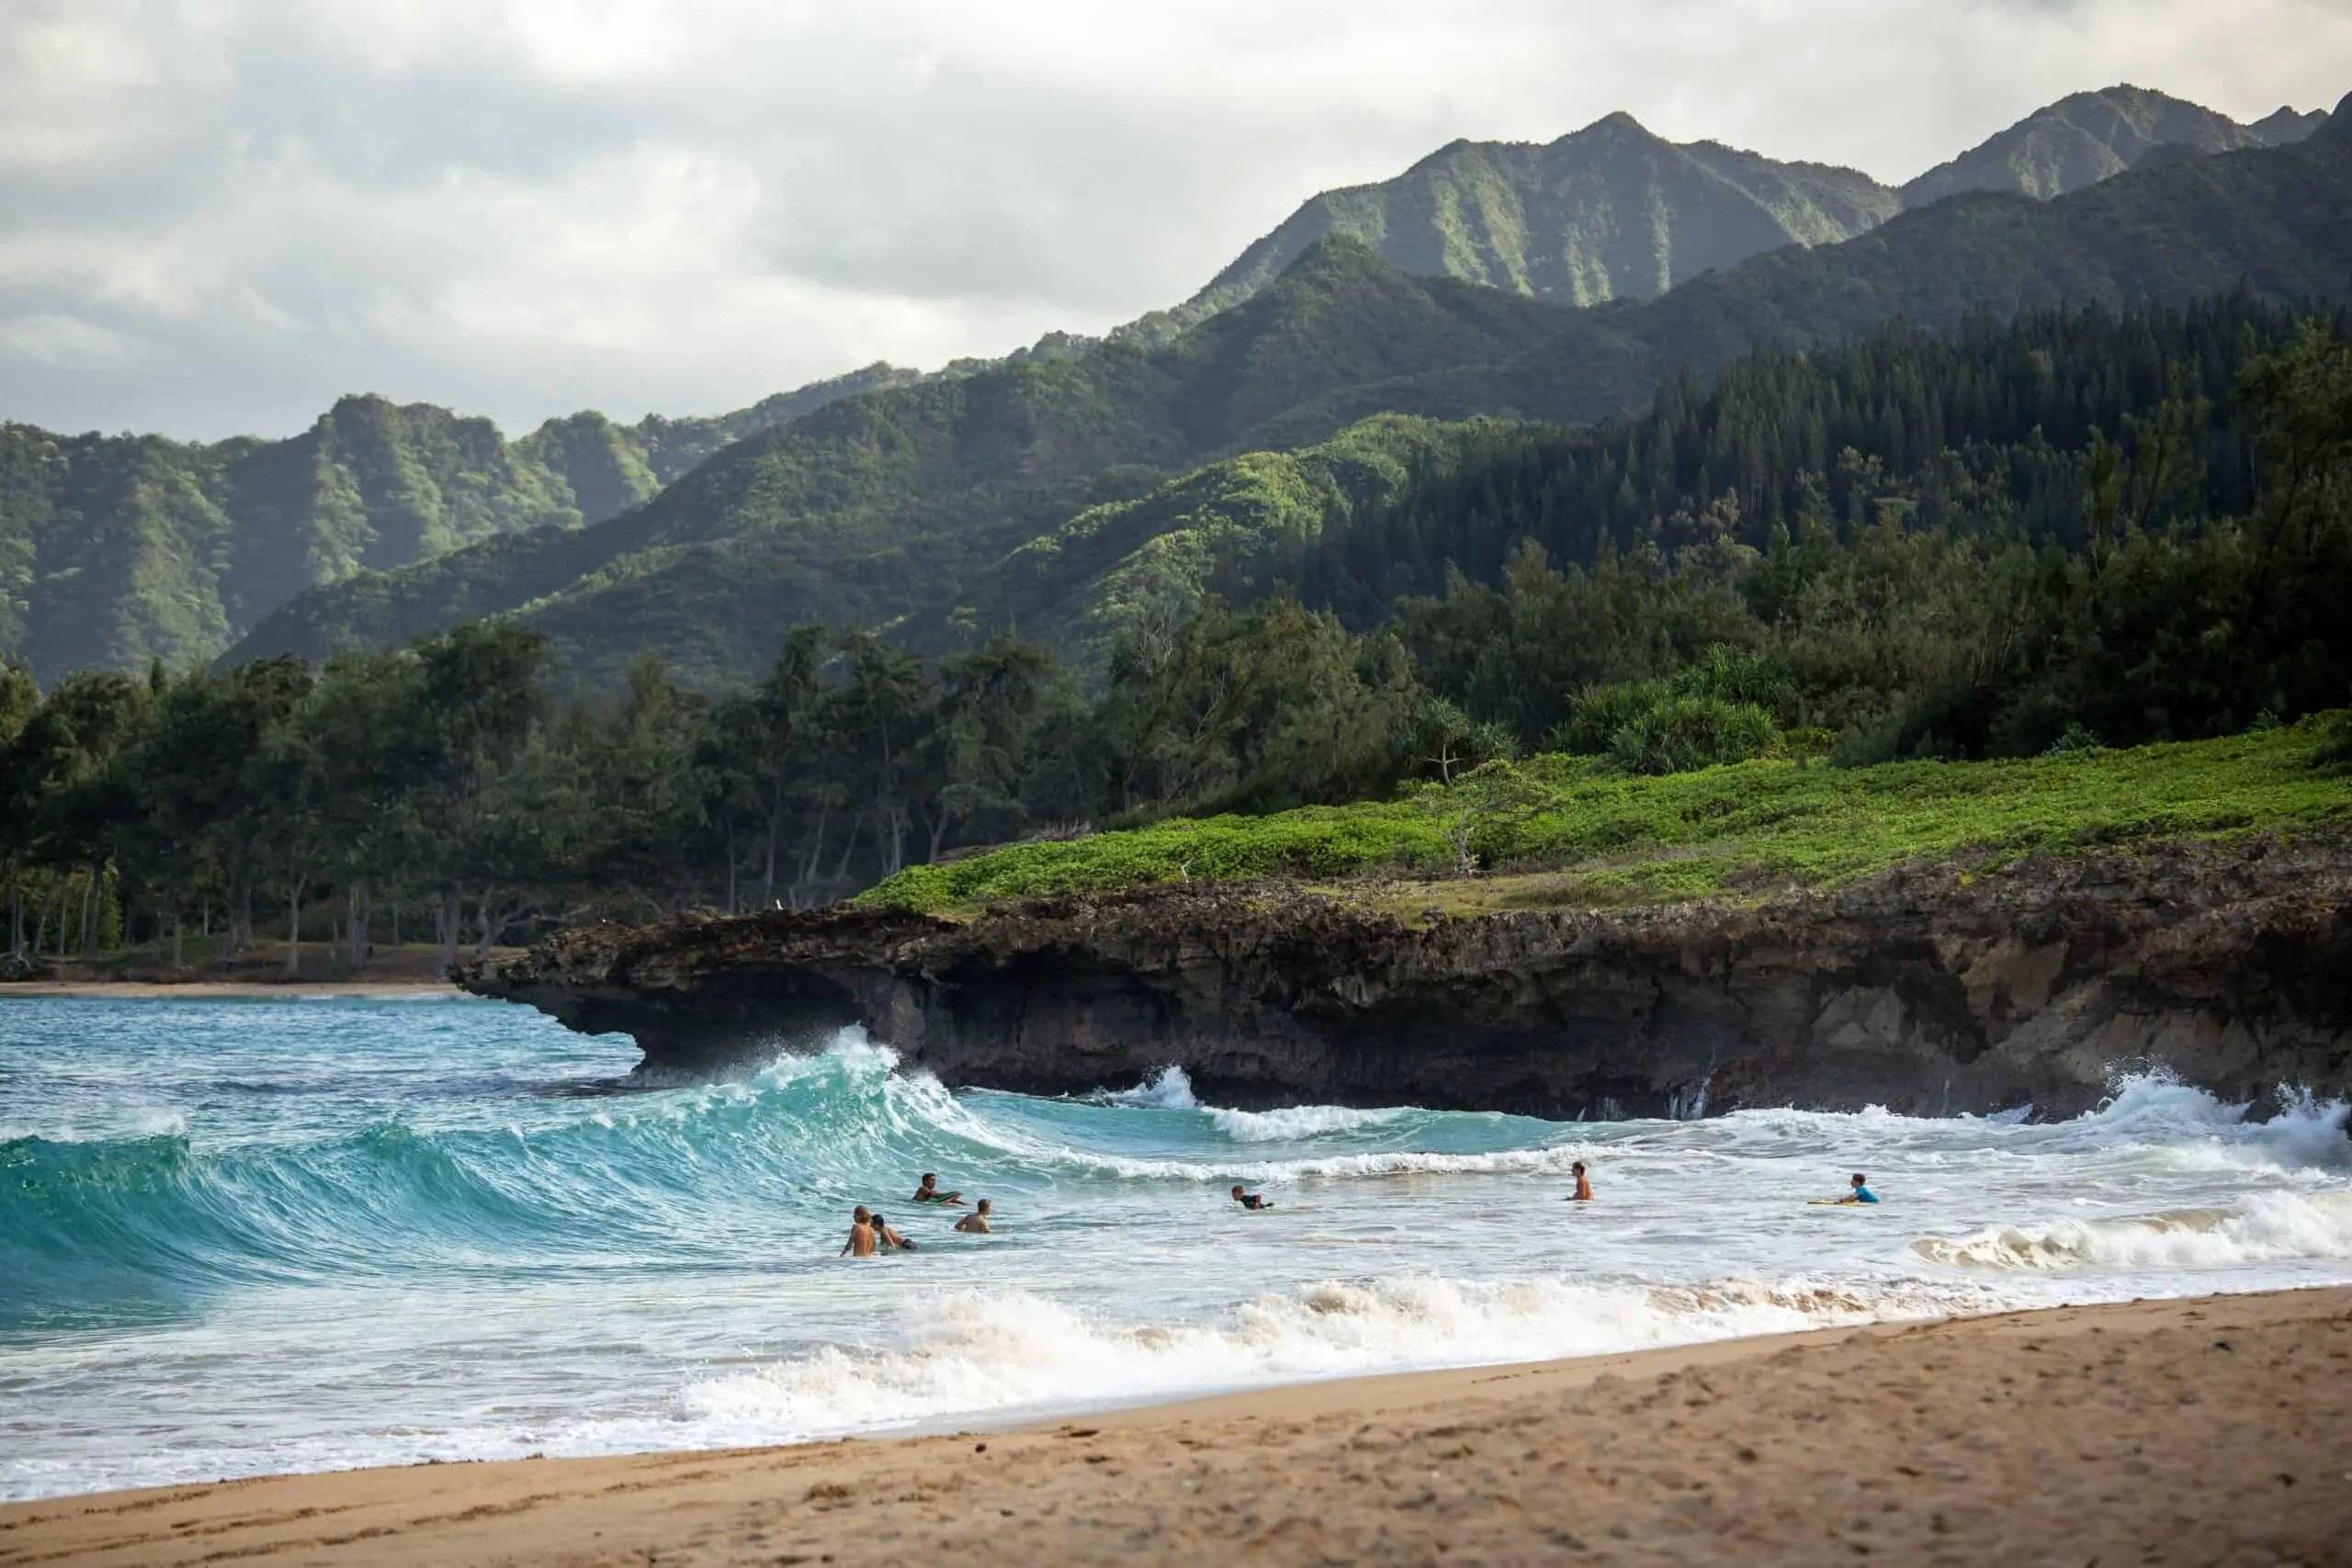 How Far in Advance Should You Plan a Hawaii Trip